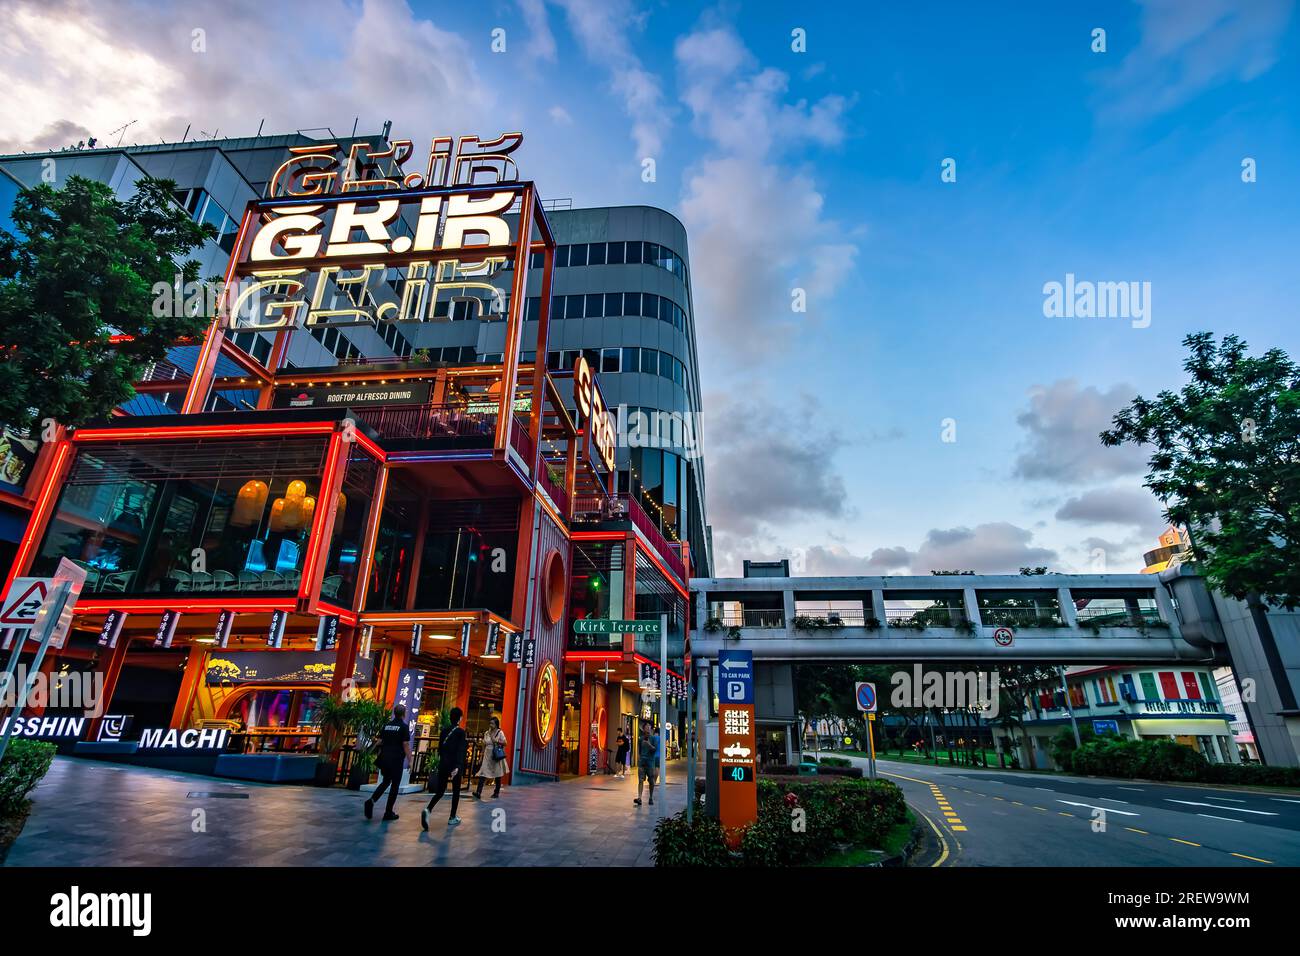 GR.iD mall In Dhoby Ghaut With Cyberpunk Vibes, Previously Known As PoMo along Selegie Road, Singapore. Stock Photo